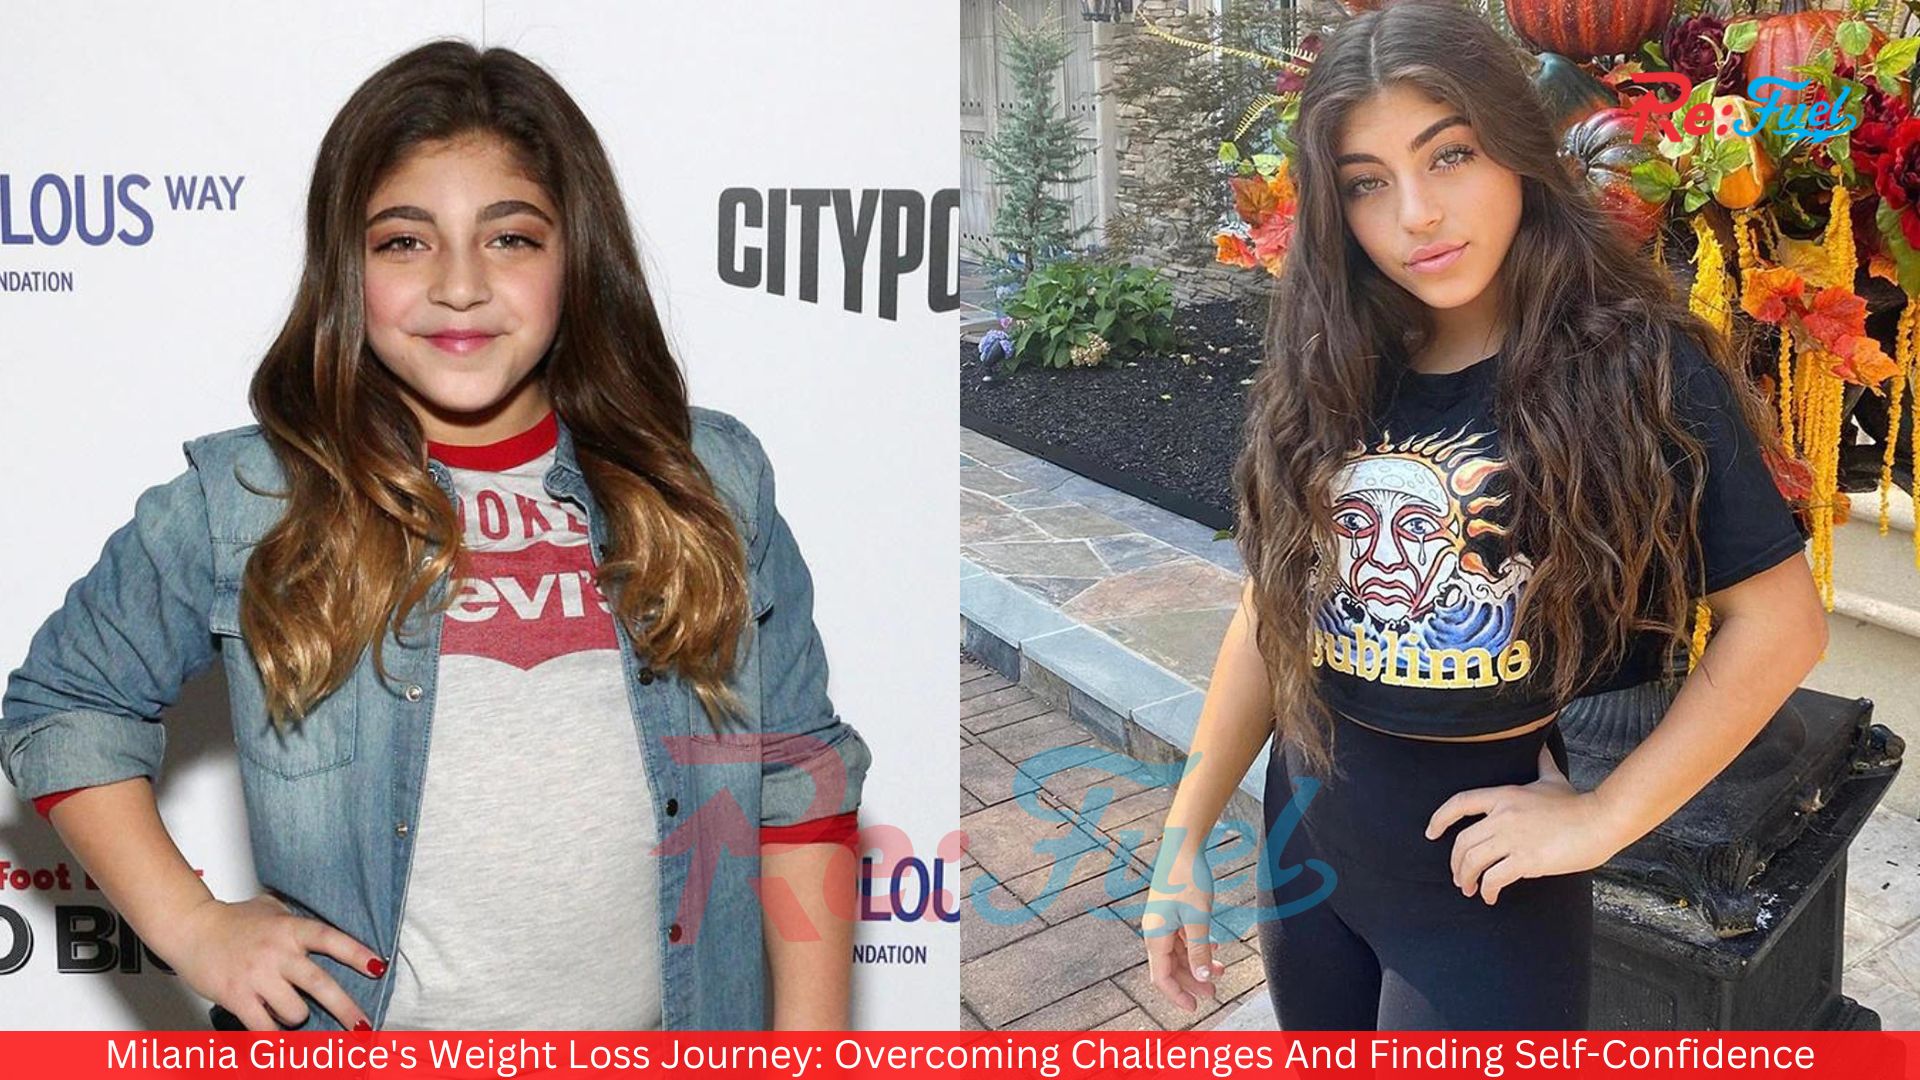 Milania Giudice's Weight Loss Journey: Overcoming Challenges And Finding Self-Confidence